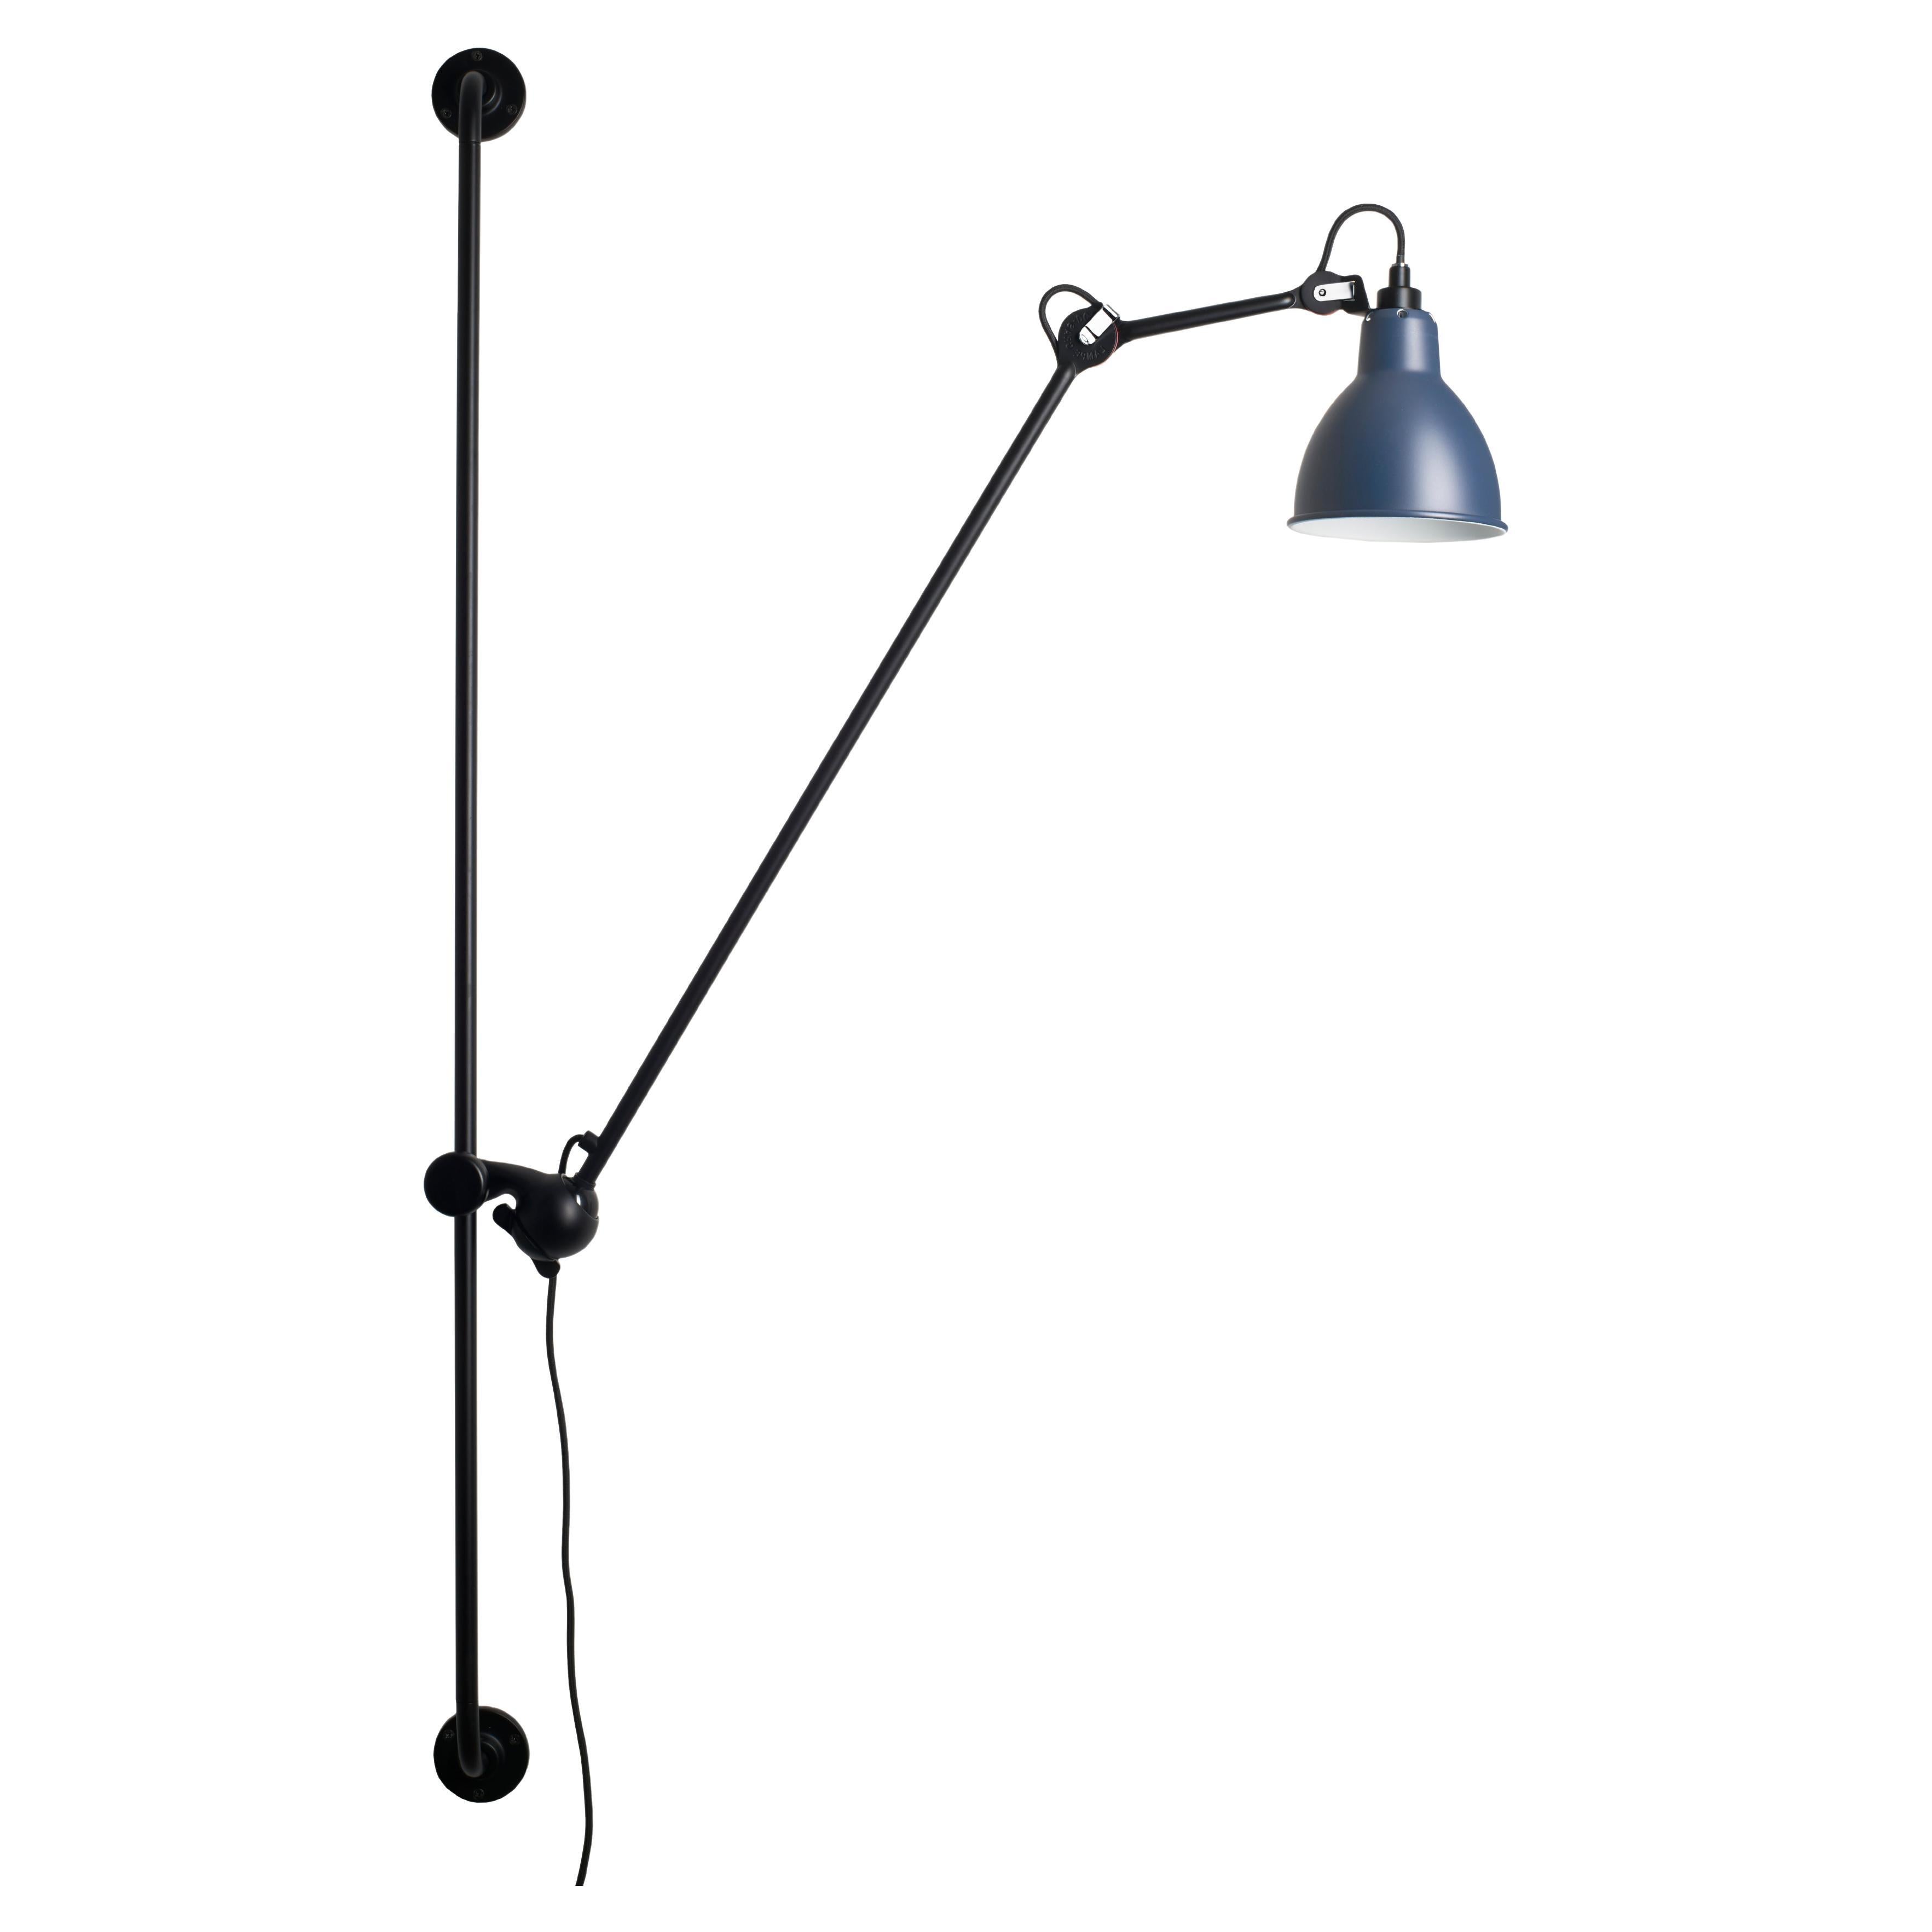 DCW Editions La Lampe Gras N°214 Round Wall Lamp in Black Arm and Blue Shade